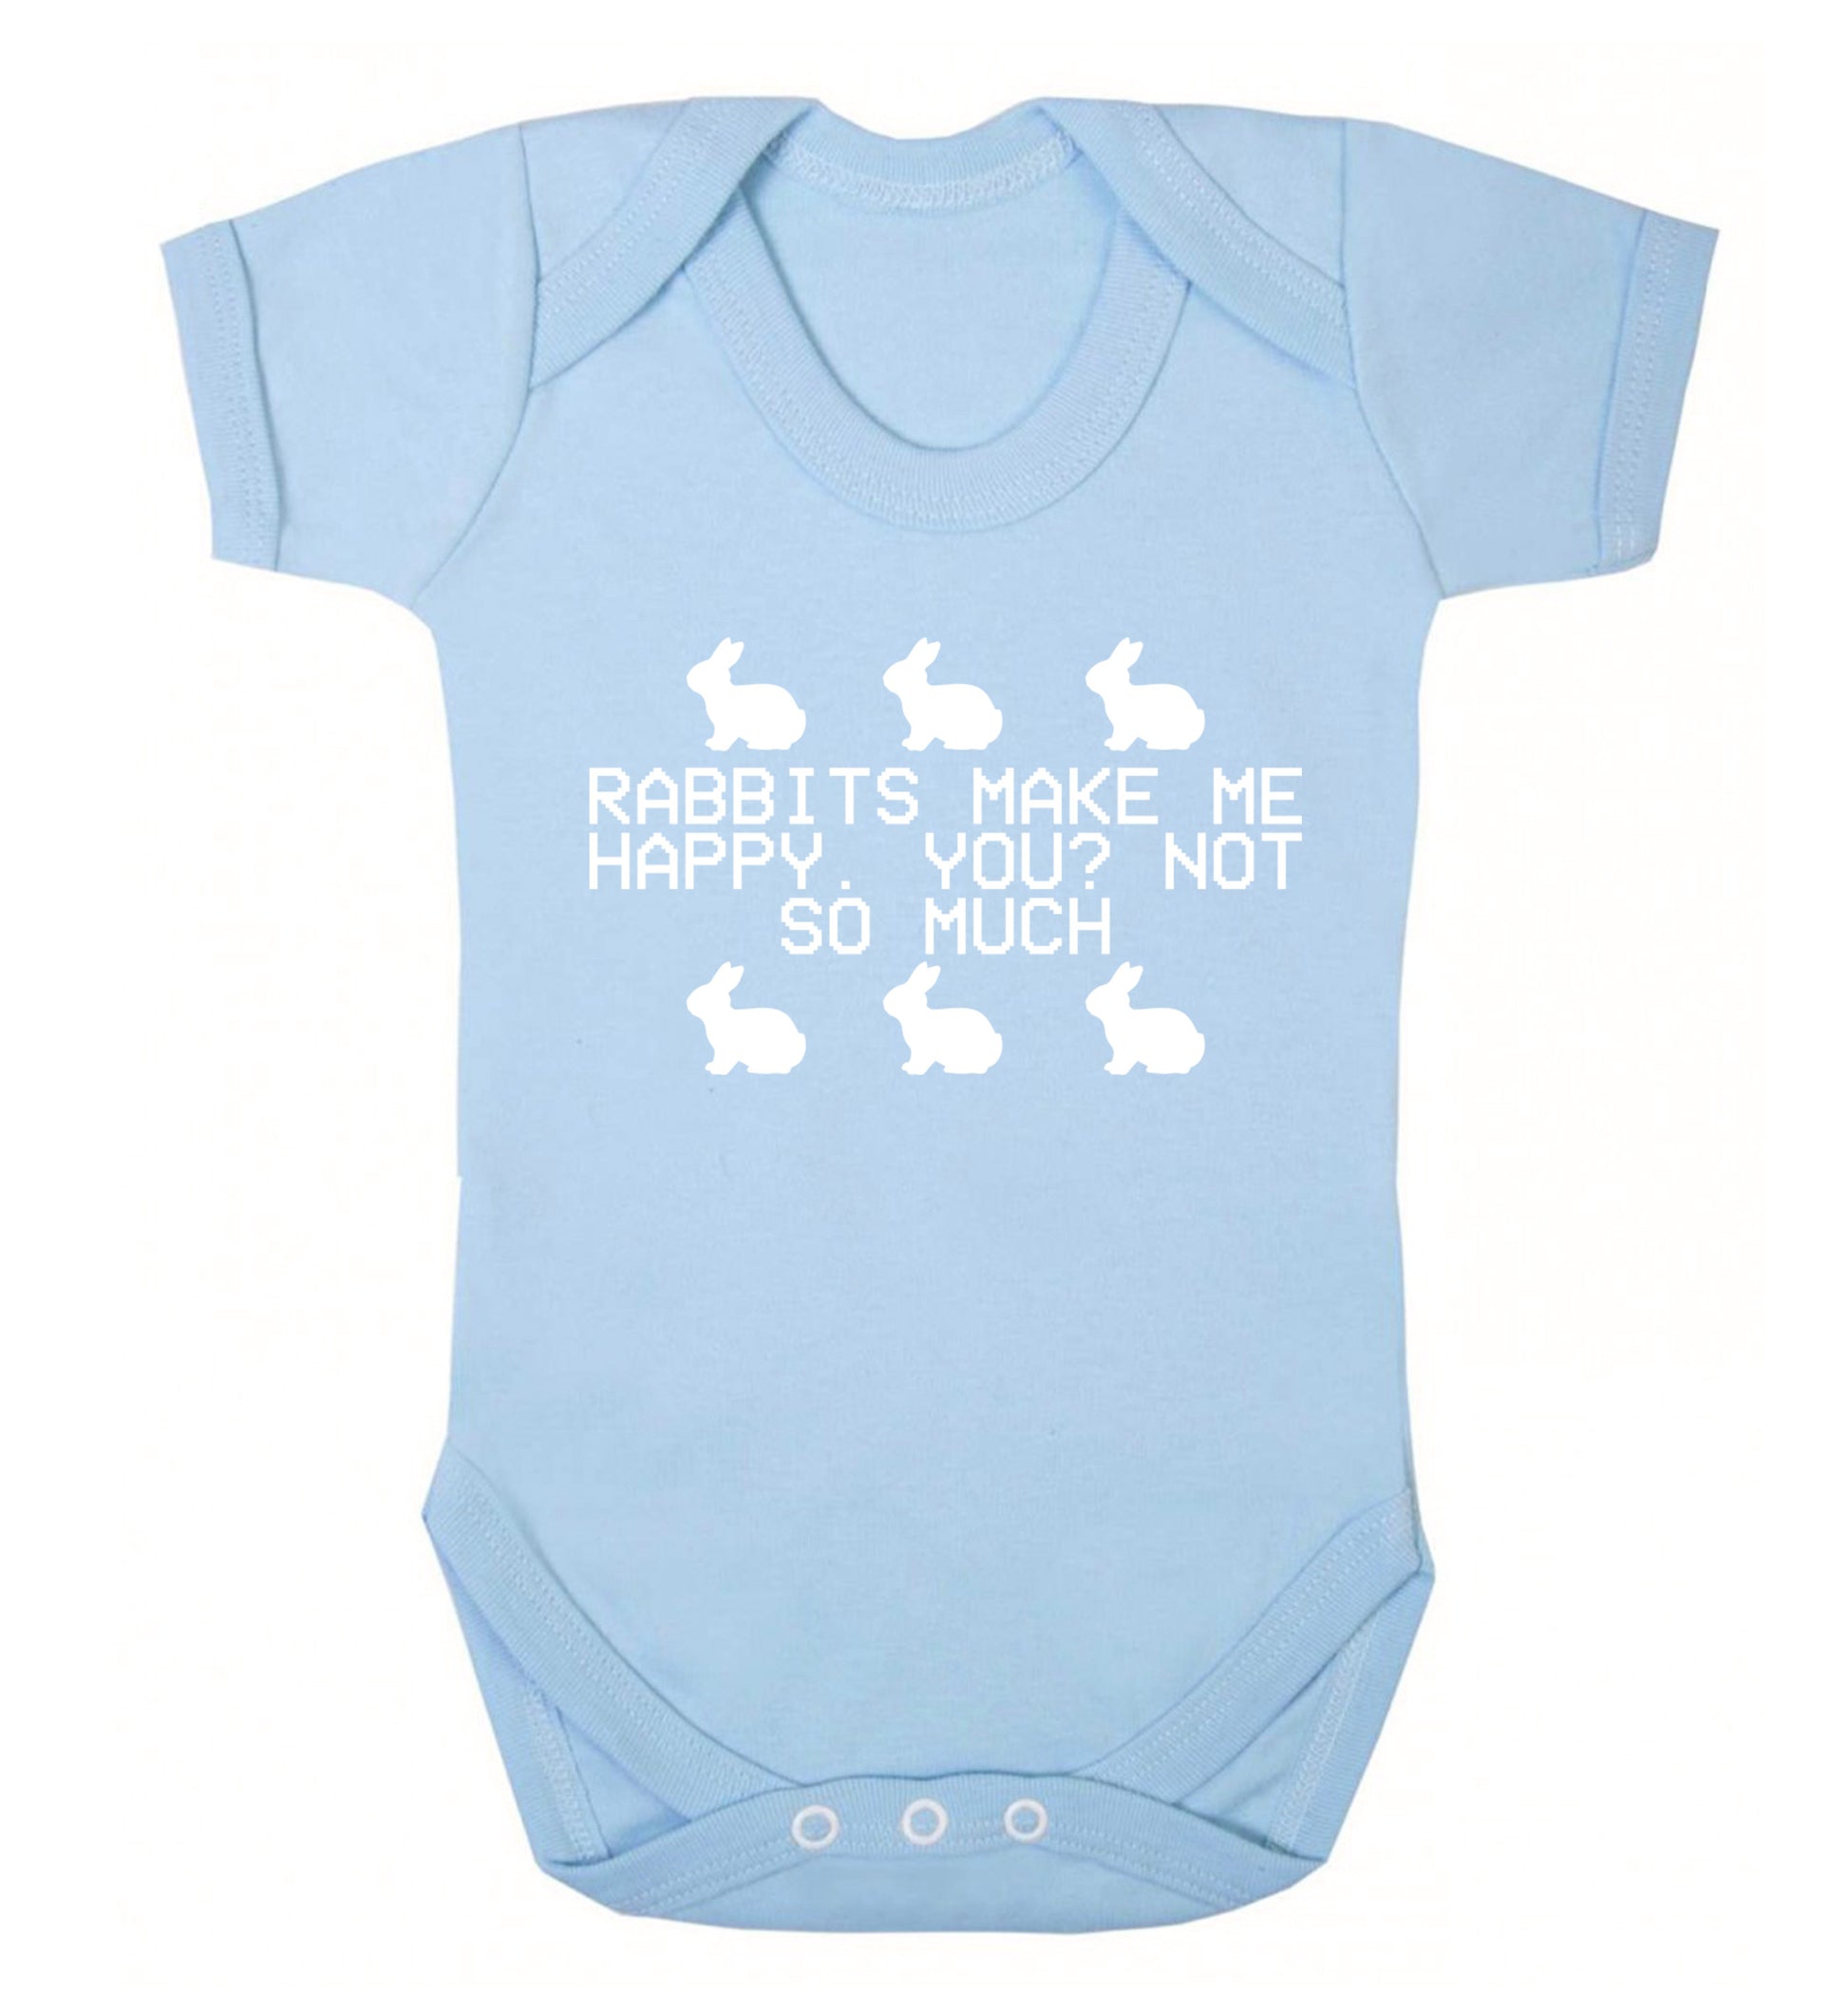 Rabbits make me happy, you not so much Baby Vest pale blue 18-24 months